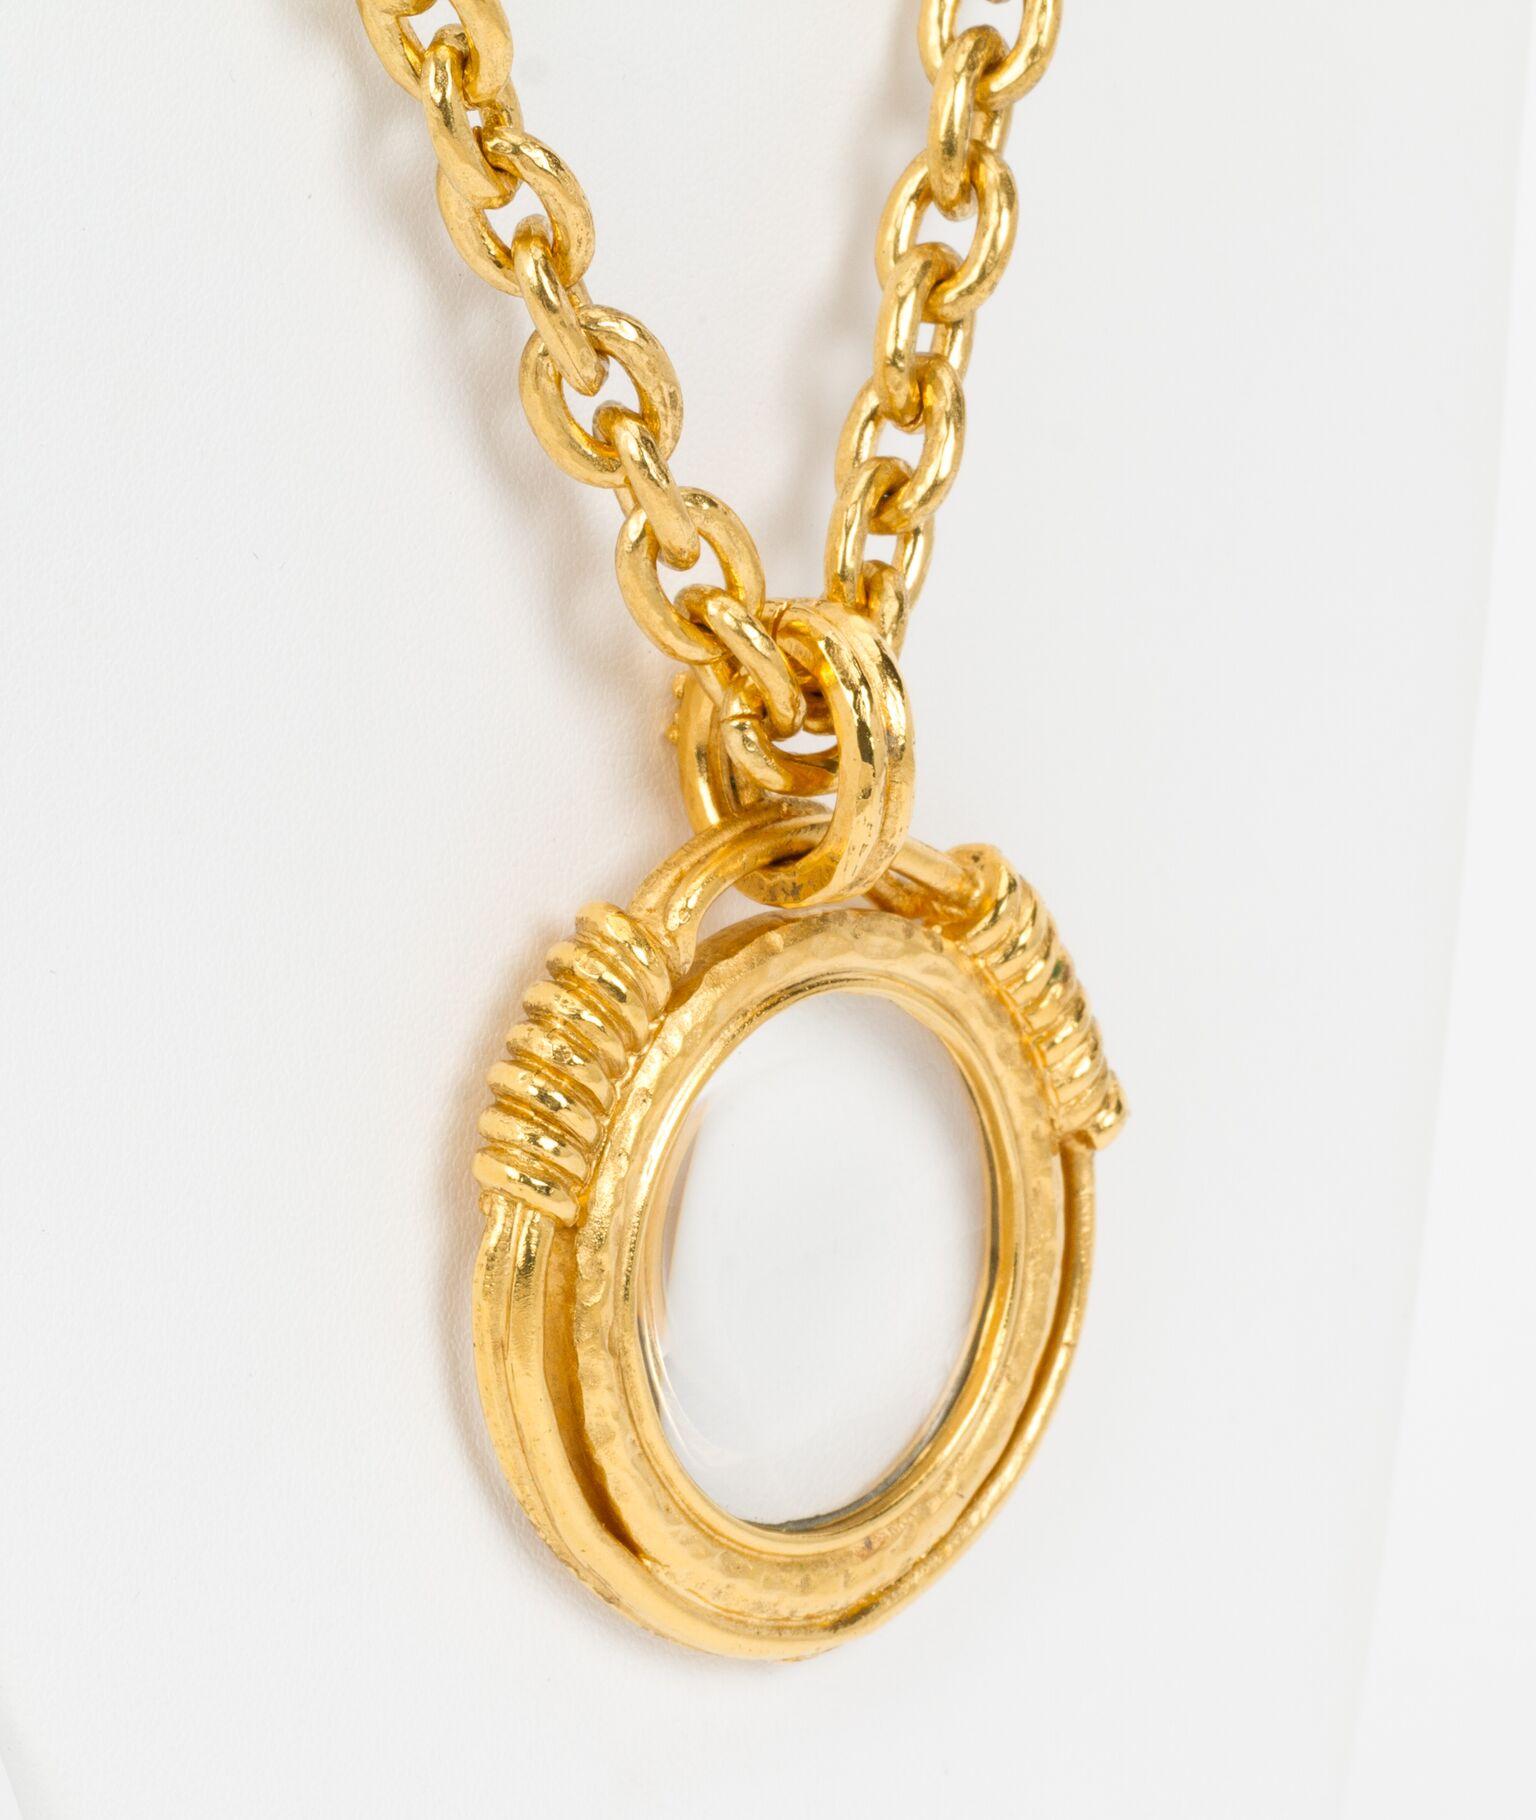 Chanel Satin Gold 80s Magnifier Necklace For Sale 1